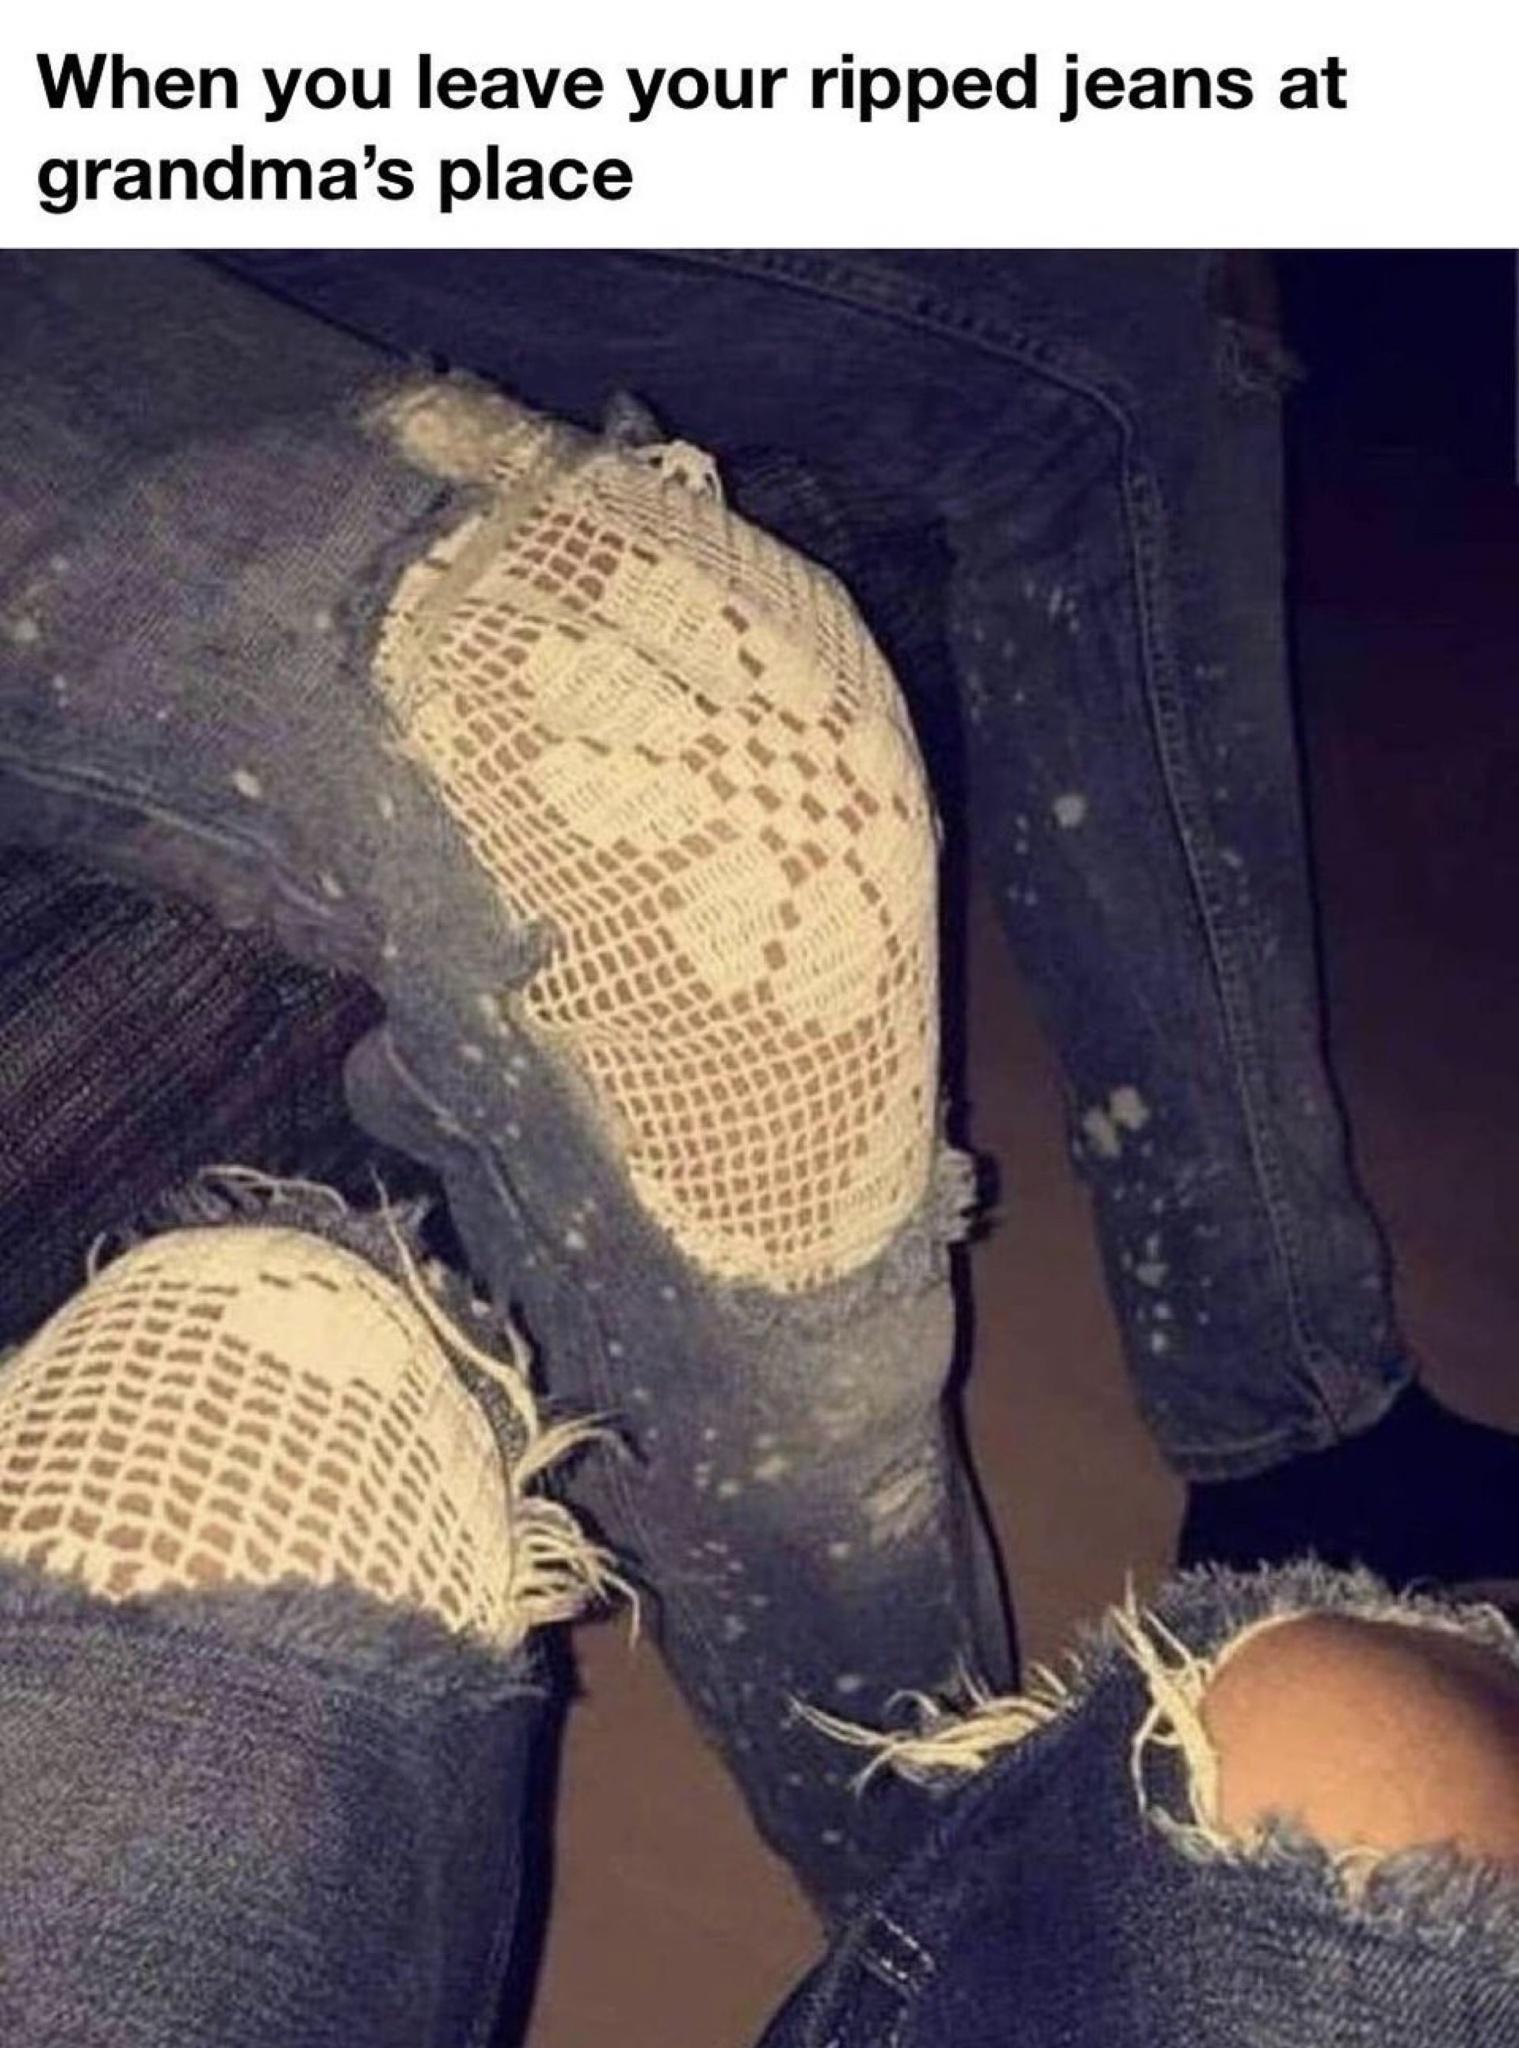 redneck memes and pics - ripped jeans grandma - When you leave your ripped jeans at grandma's place